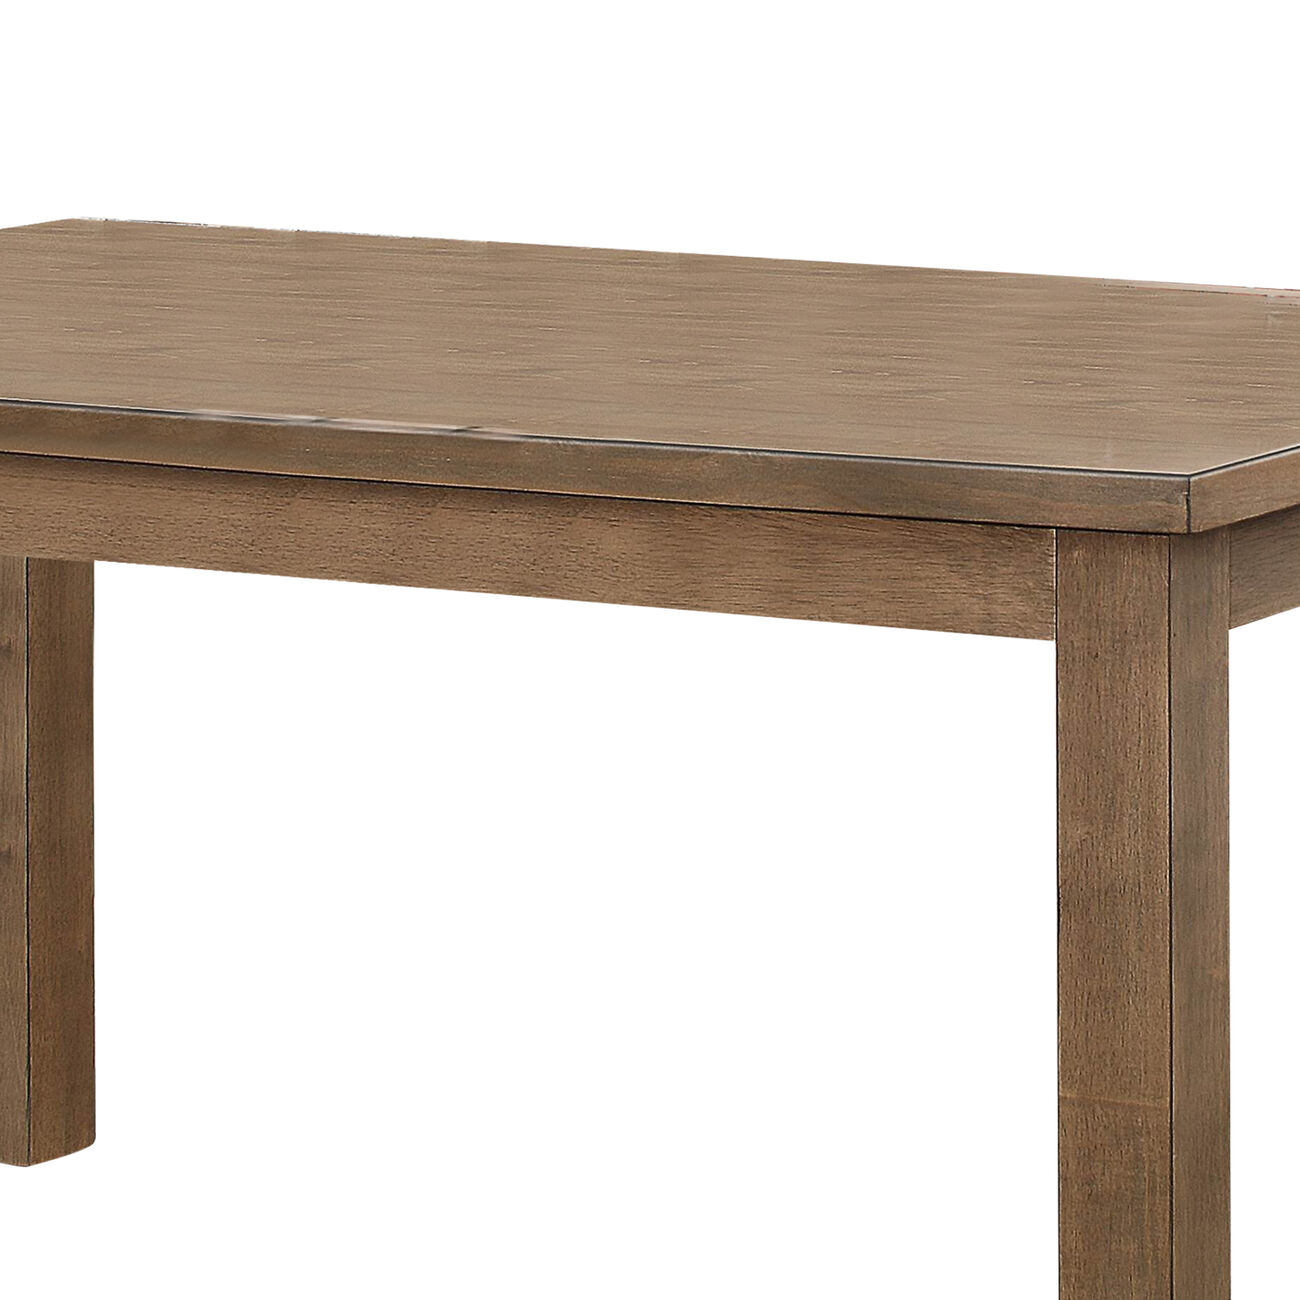 Transitional Wooden Dining Table with Grain Details and Block legs, Brown